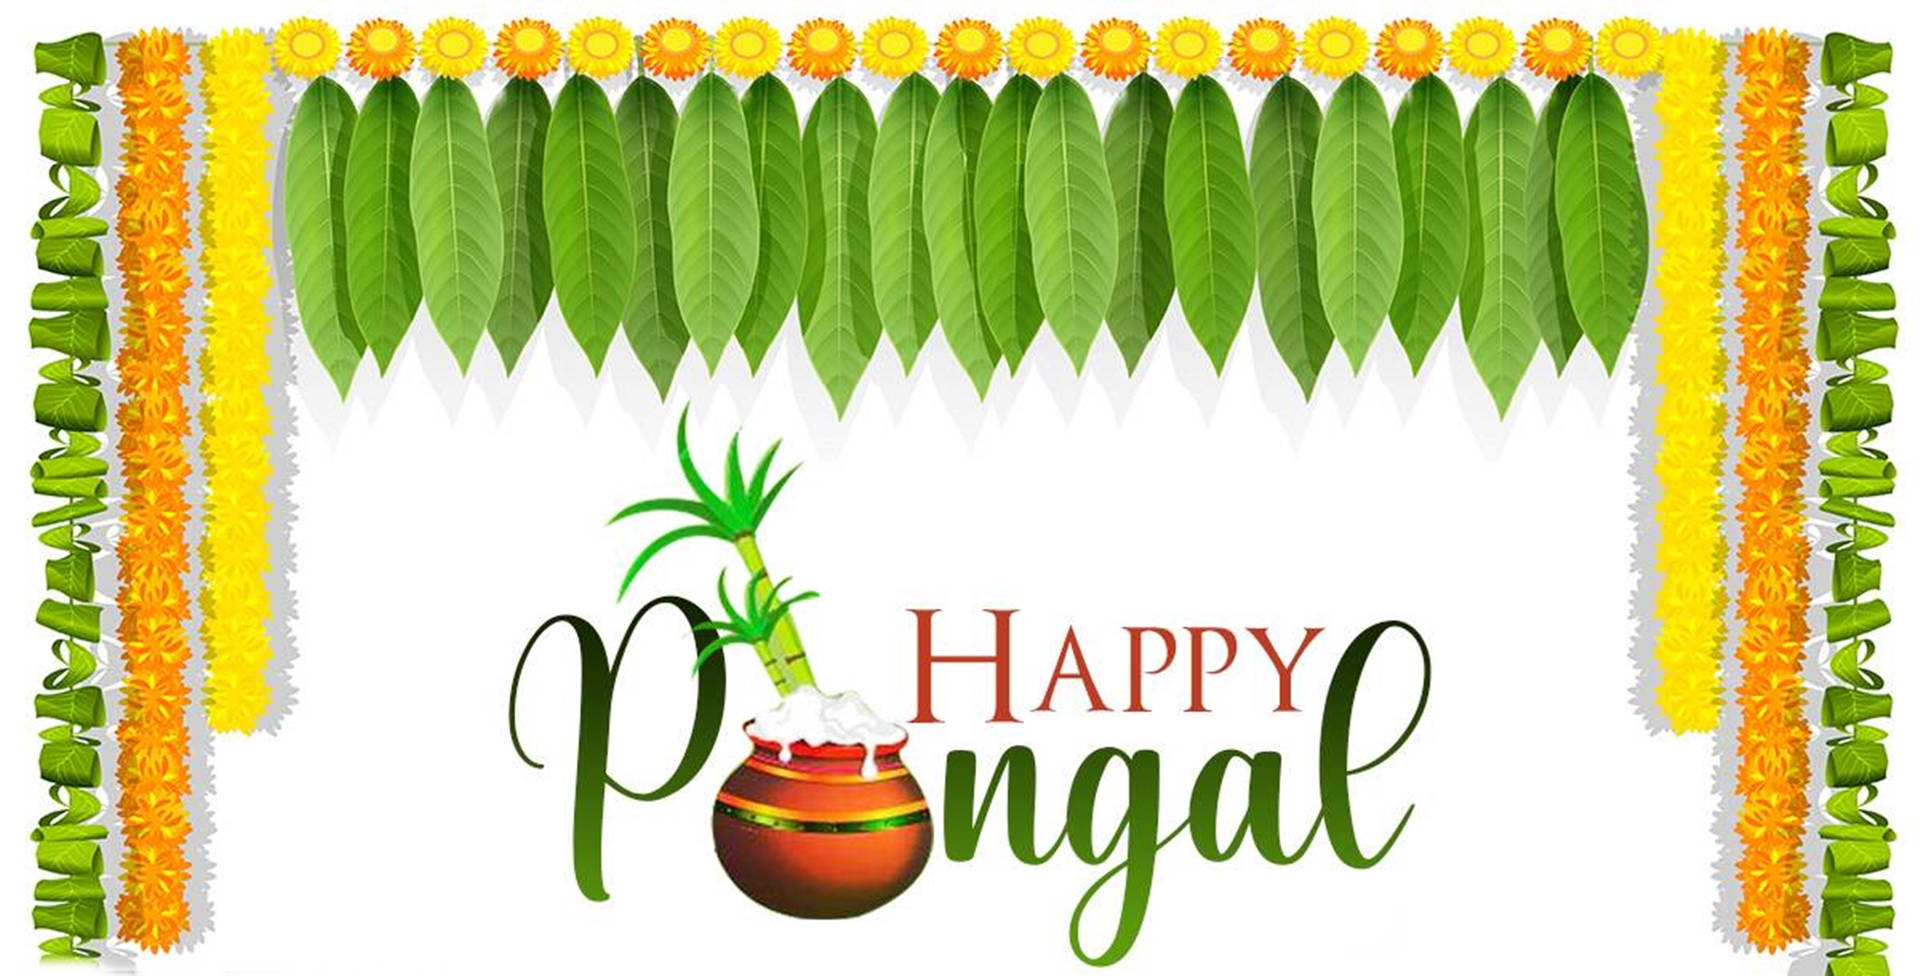 Happy Pongal Palm Leaves Background